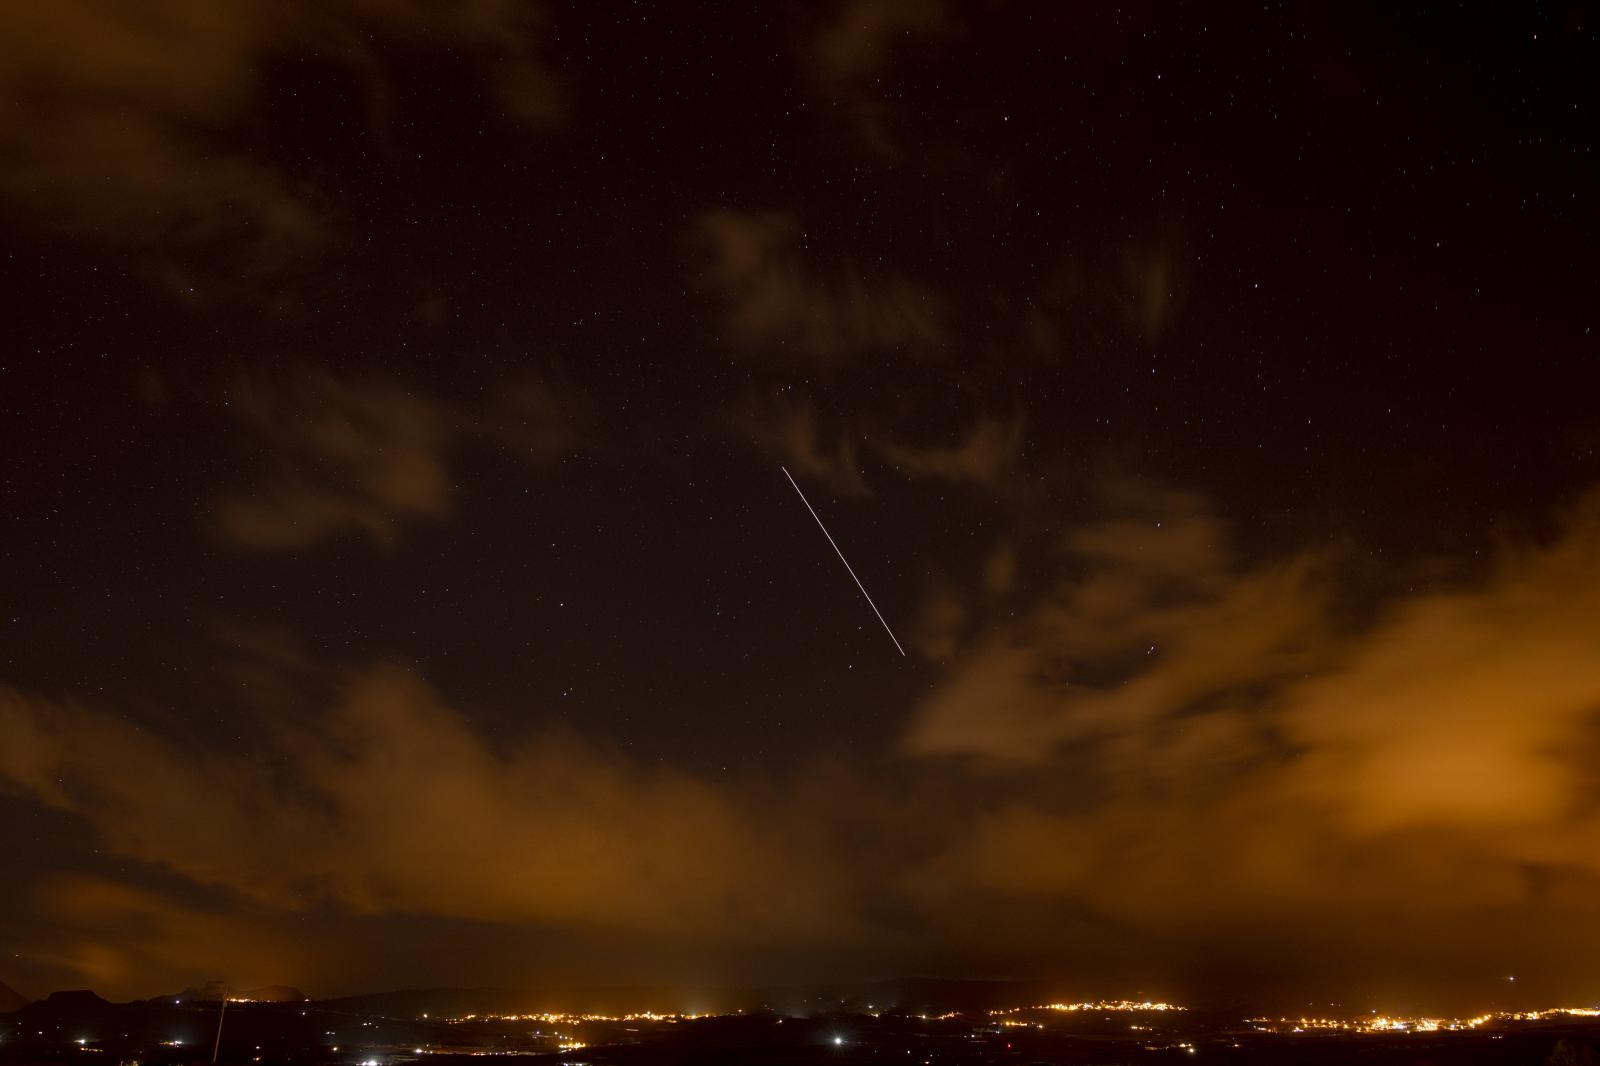 Day 4. The ISS space station pa...enerife, Canary Islands, Spain.